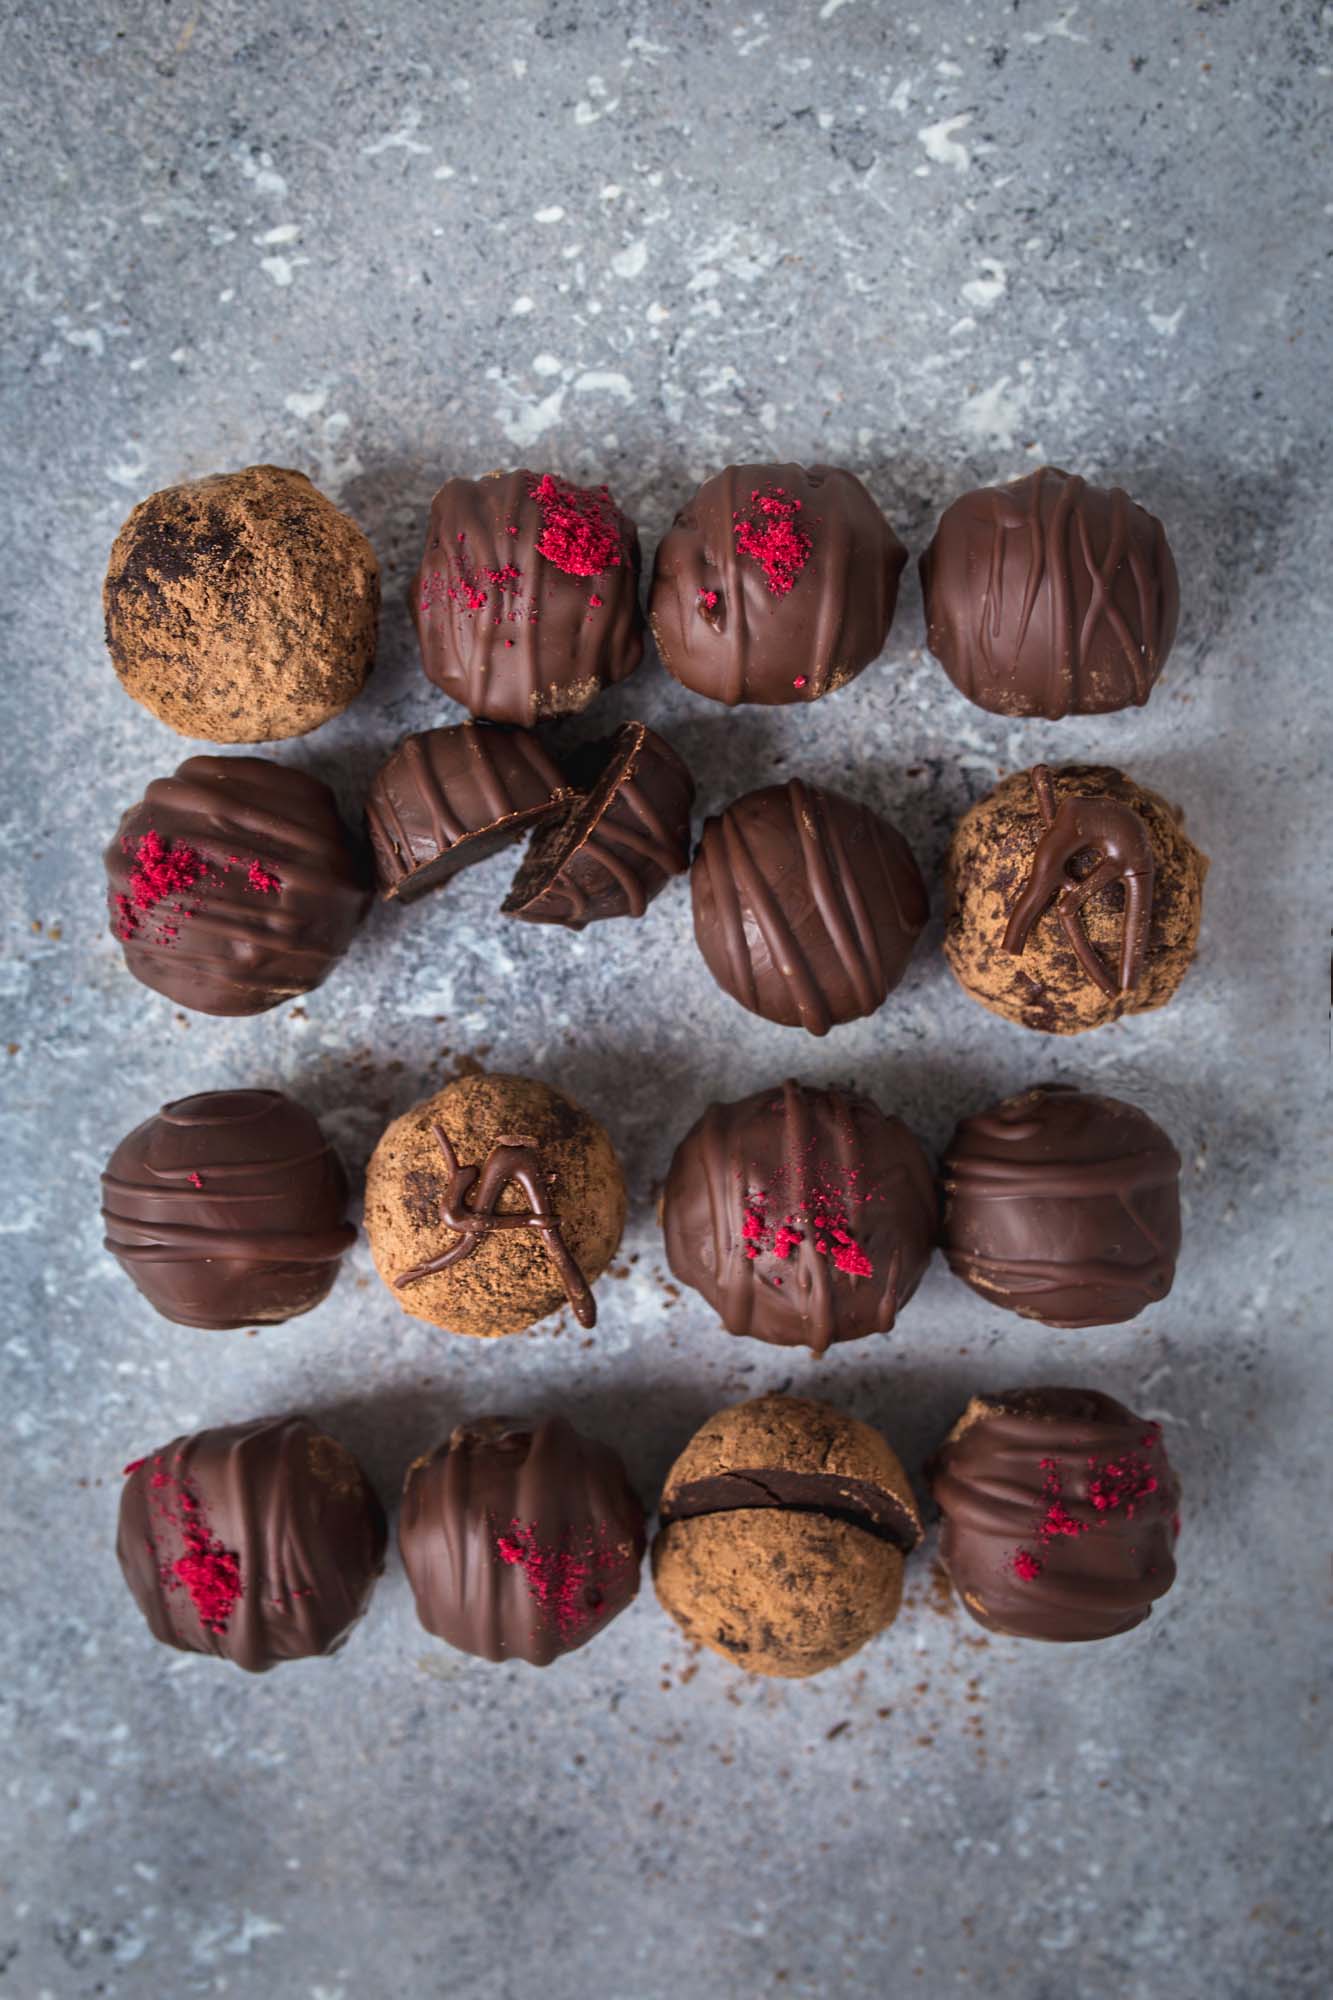 Carob Cacao Maca Truffles for hormonal balance and to satisfy your sweet cravings